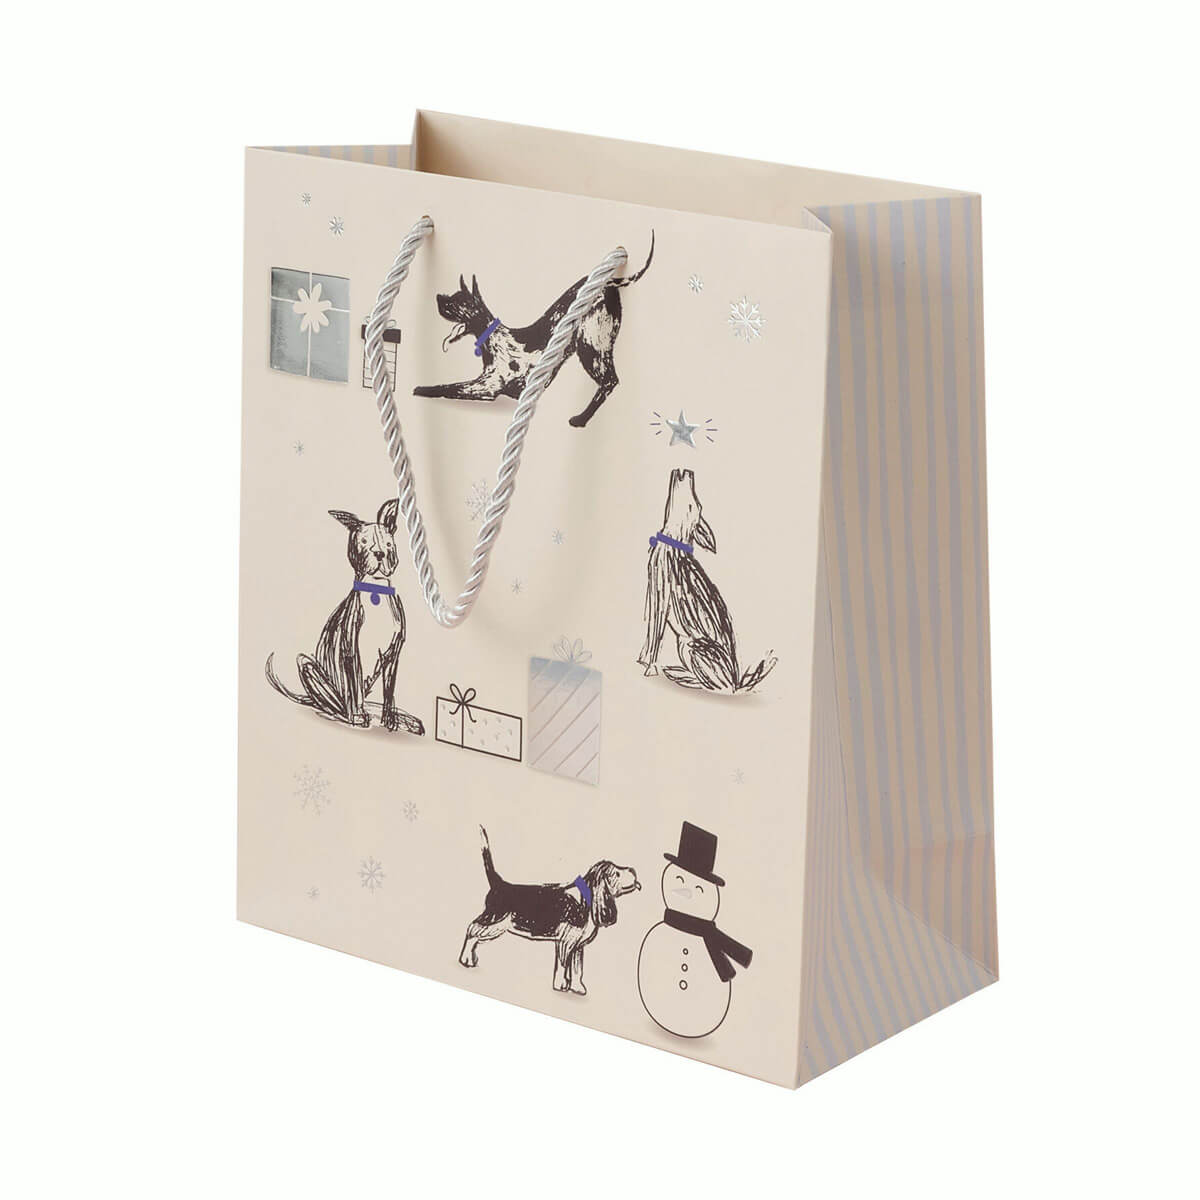 Battersea Dogs & Cats Home Christmas Gift Bag - Medium Sized - Close up Image of gift bag